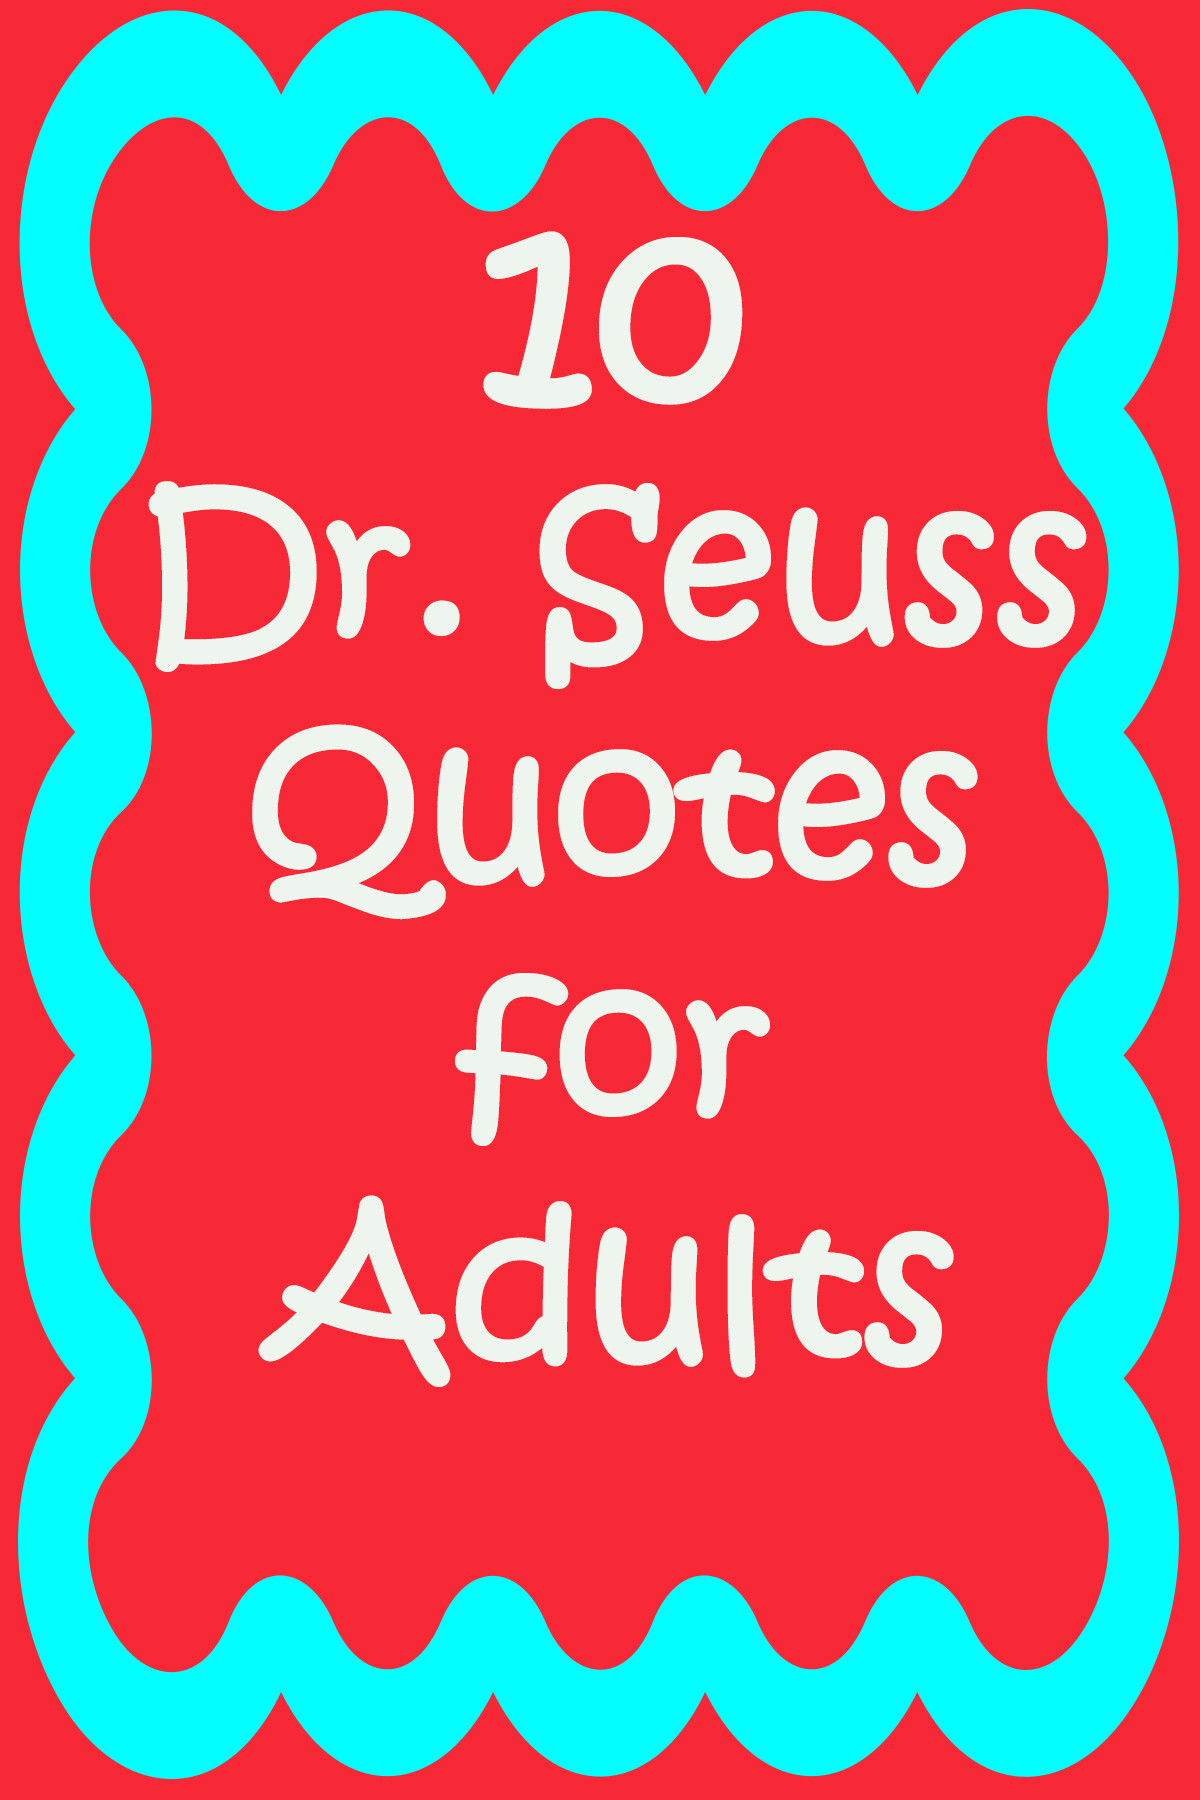 Inspirational Quote Dr Seuss
 10 Dr Seuss Quotes for Adults